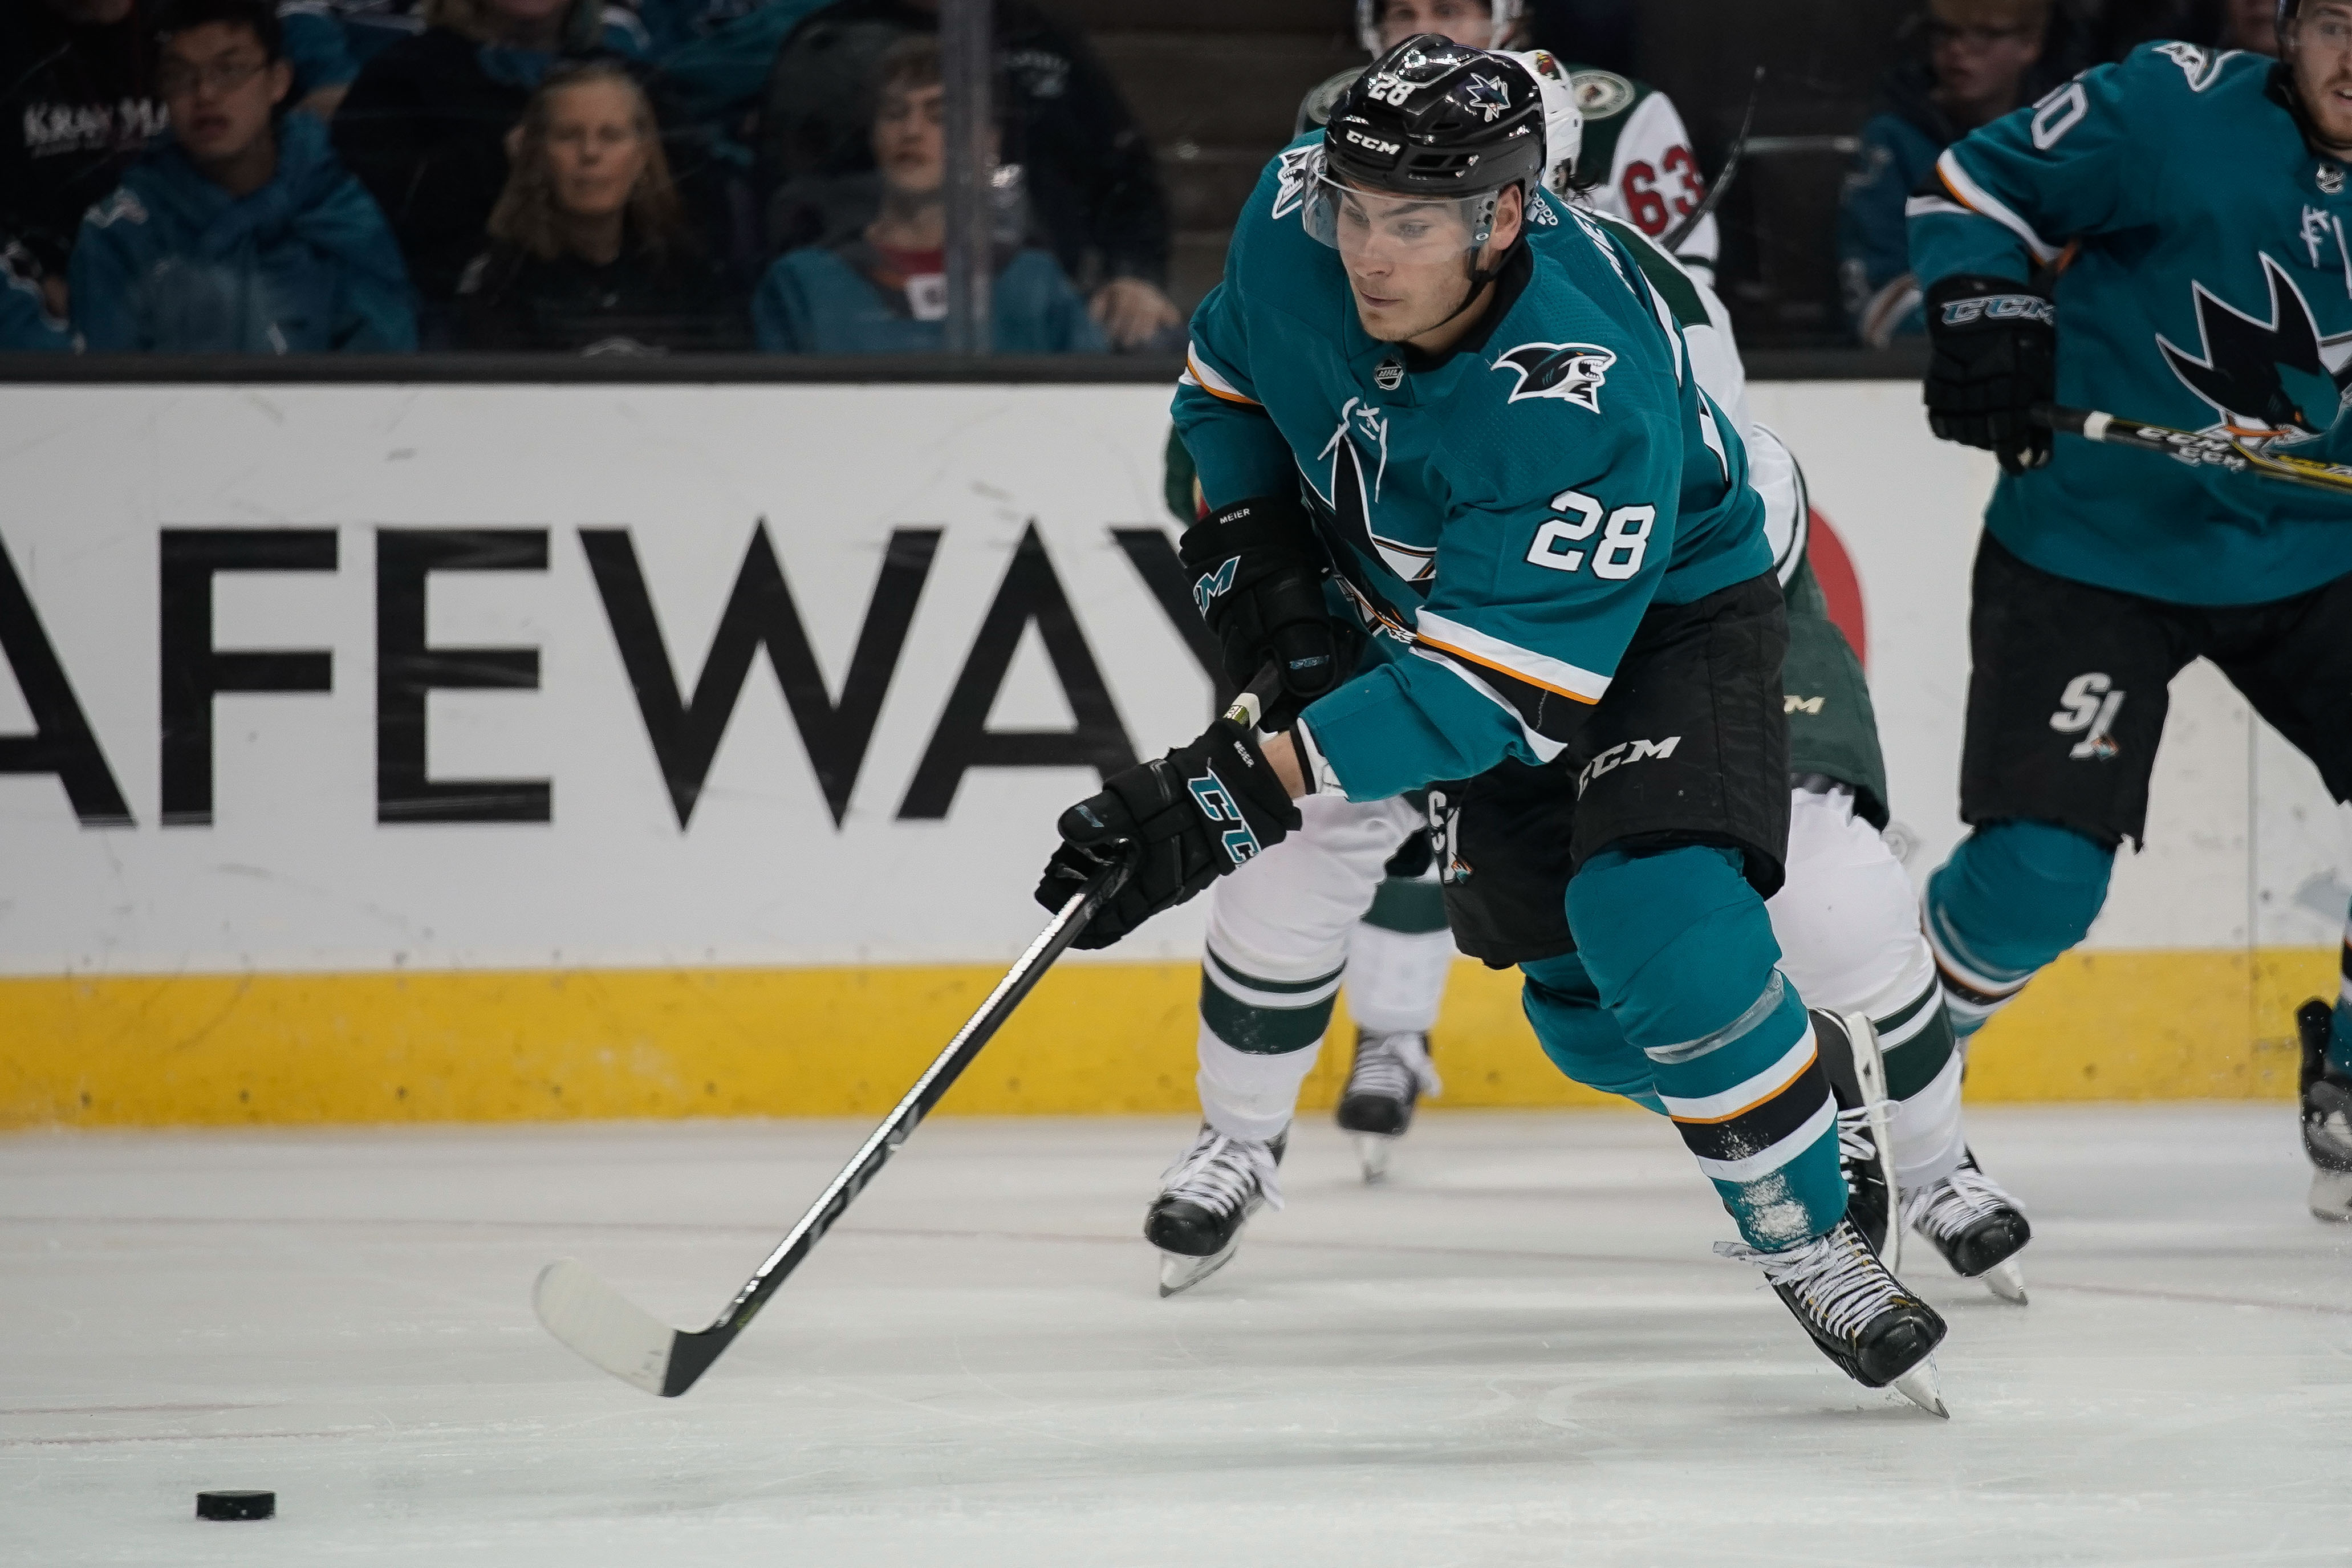 Apr 7, 2018; San Jose, CA, USA; San Jose Sharks right wing Timo Meier (28) controls the puck against the Minnesota Wild during the second period at SAP Center at San Jose.